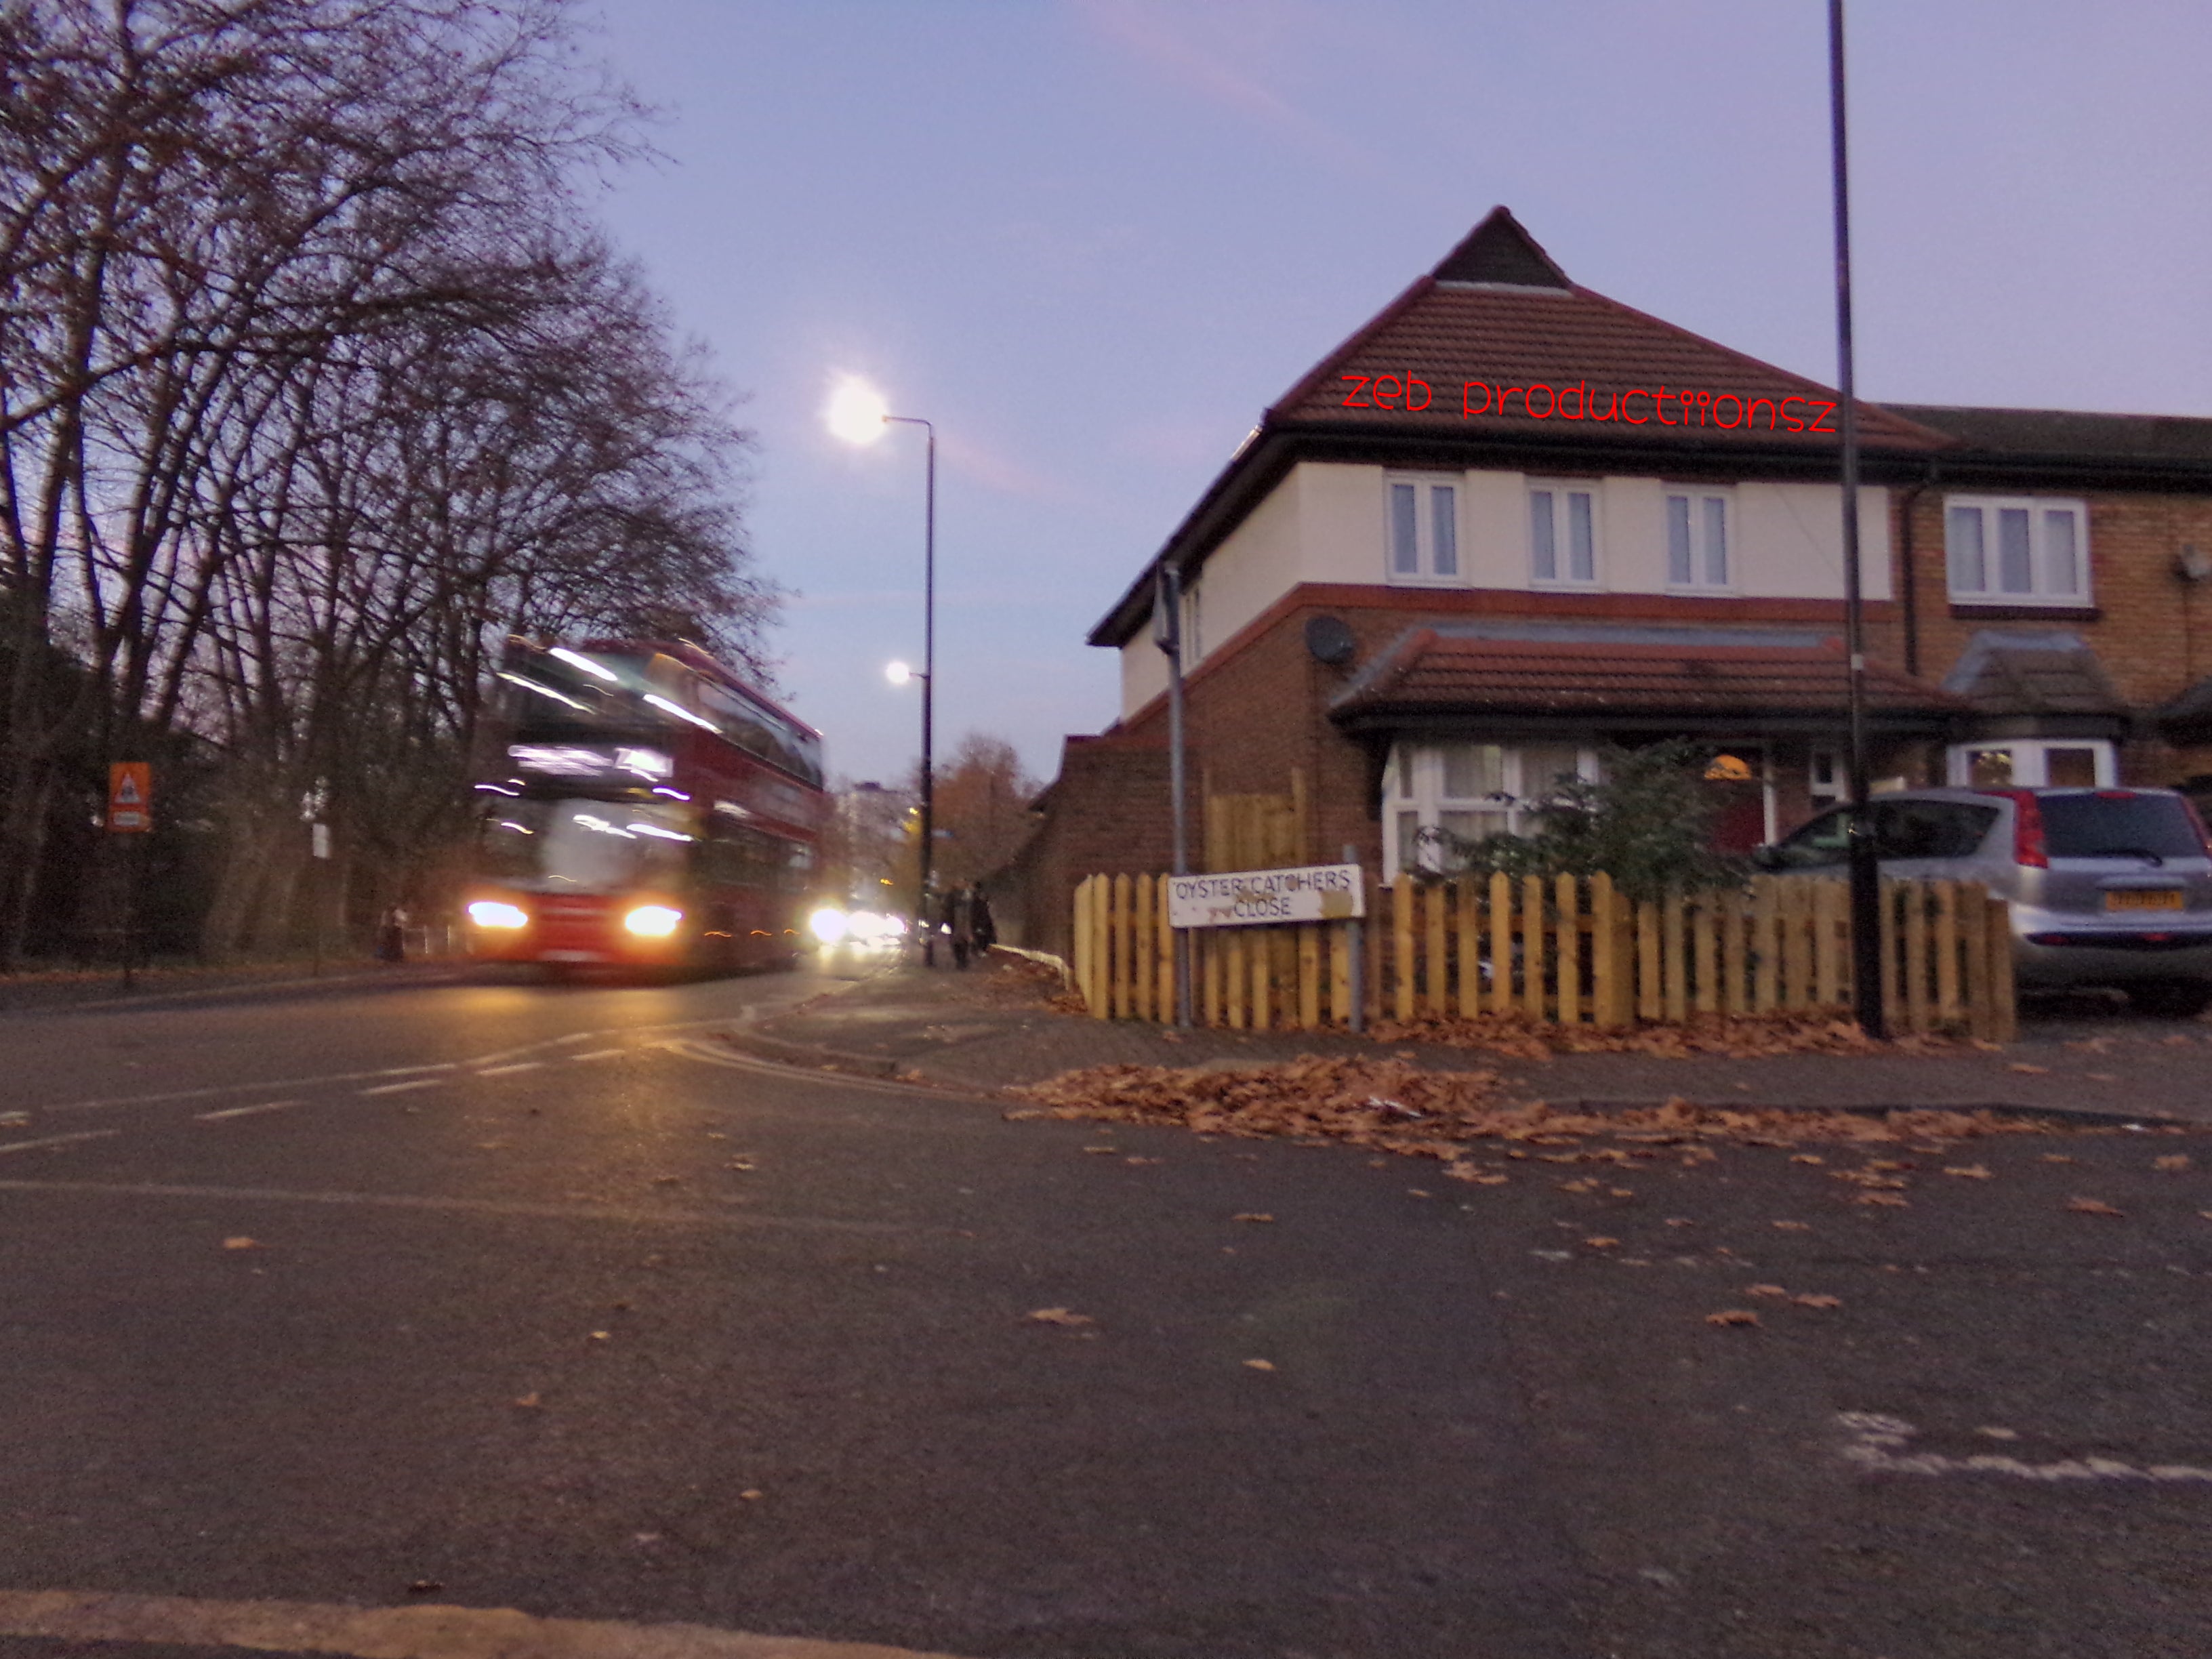 A wide frame picture of the end of a close, there are bare trees on the left of the picture, a red bus driving pass. the pavement is empty. the house on the right is brown and white, there is a silver jeep style car in the drive way. on the roof it says "zeb productiionzs" in a red graffiti style